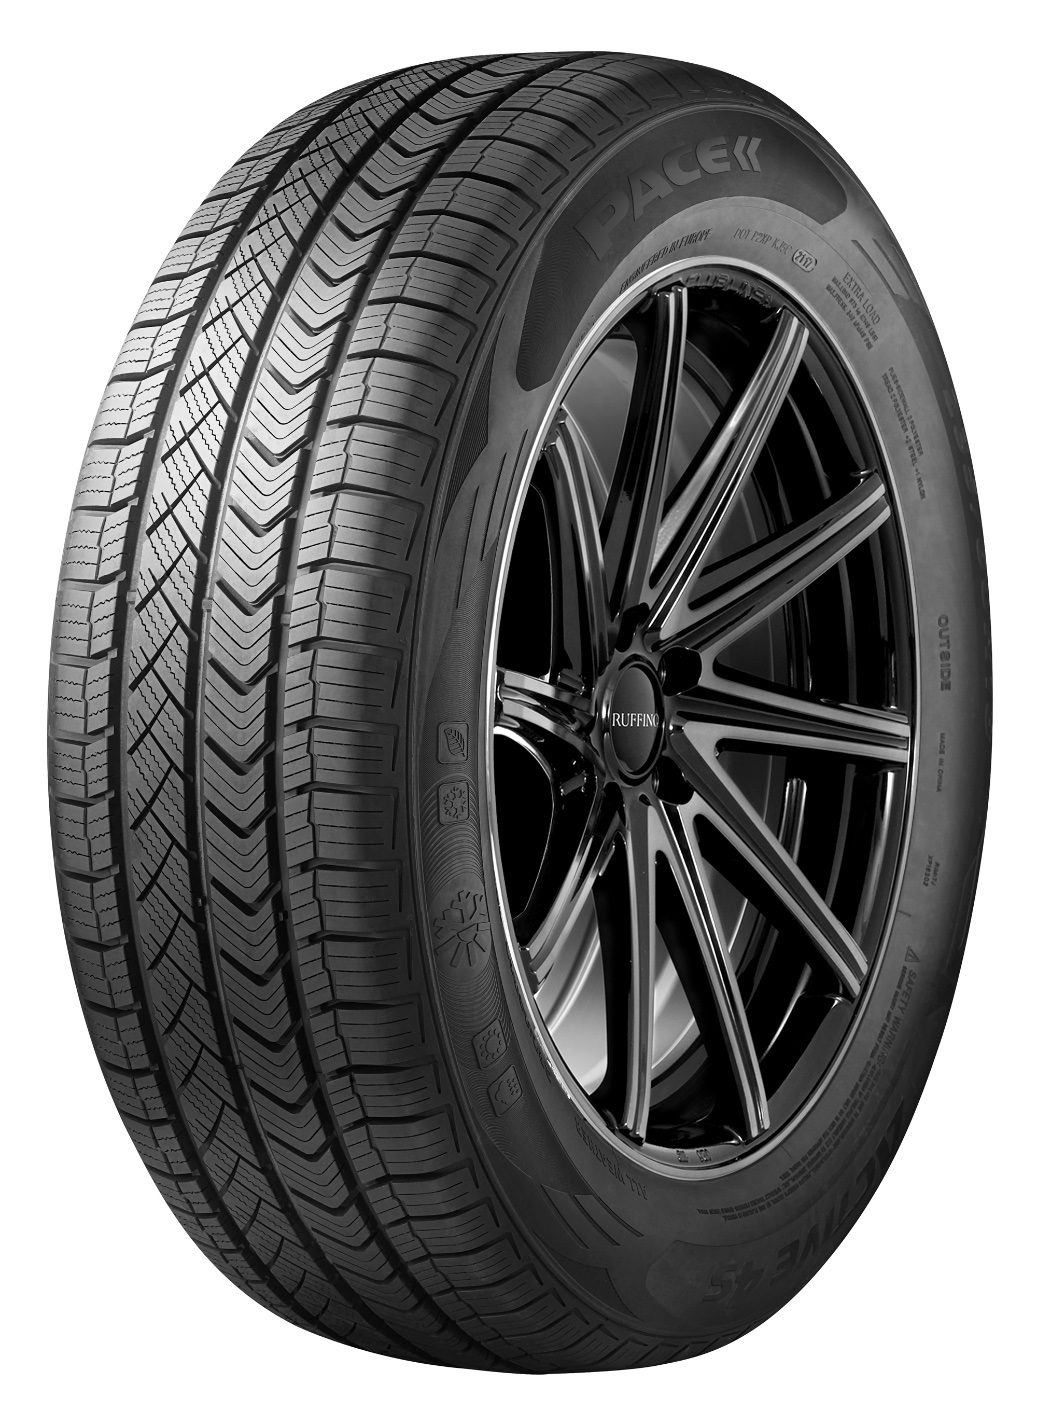 Gomme Nuove Pace 195/55 R15 85H ACTIVE 4S M+S pneumatici nuovi All Season